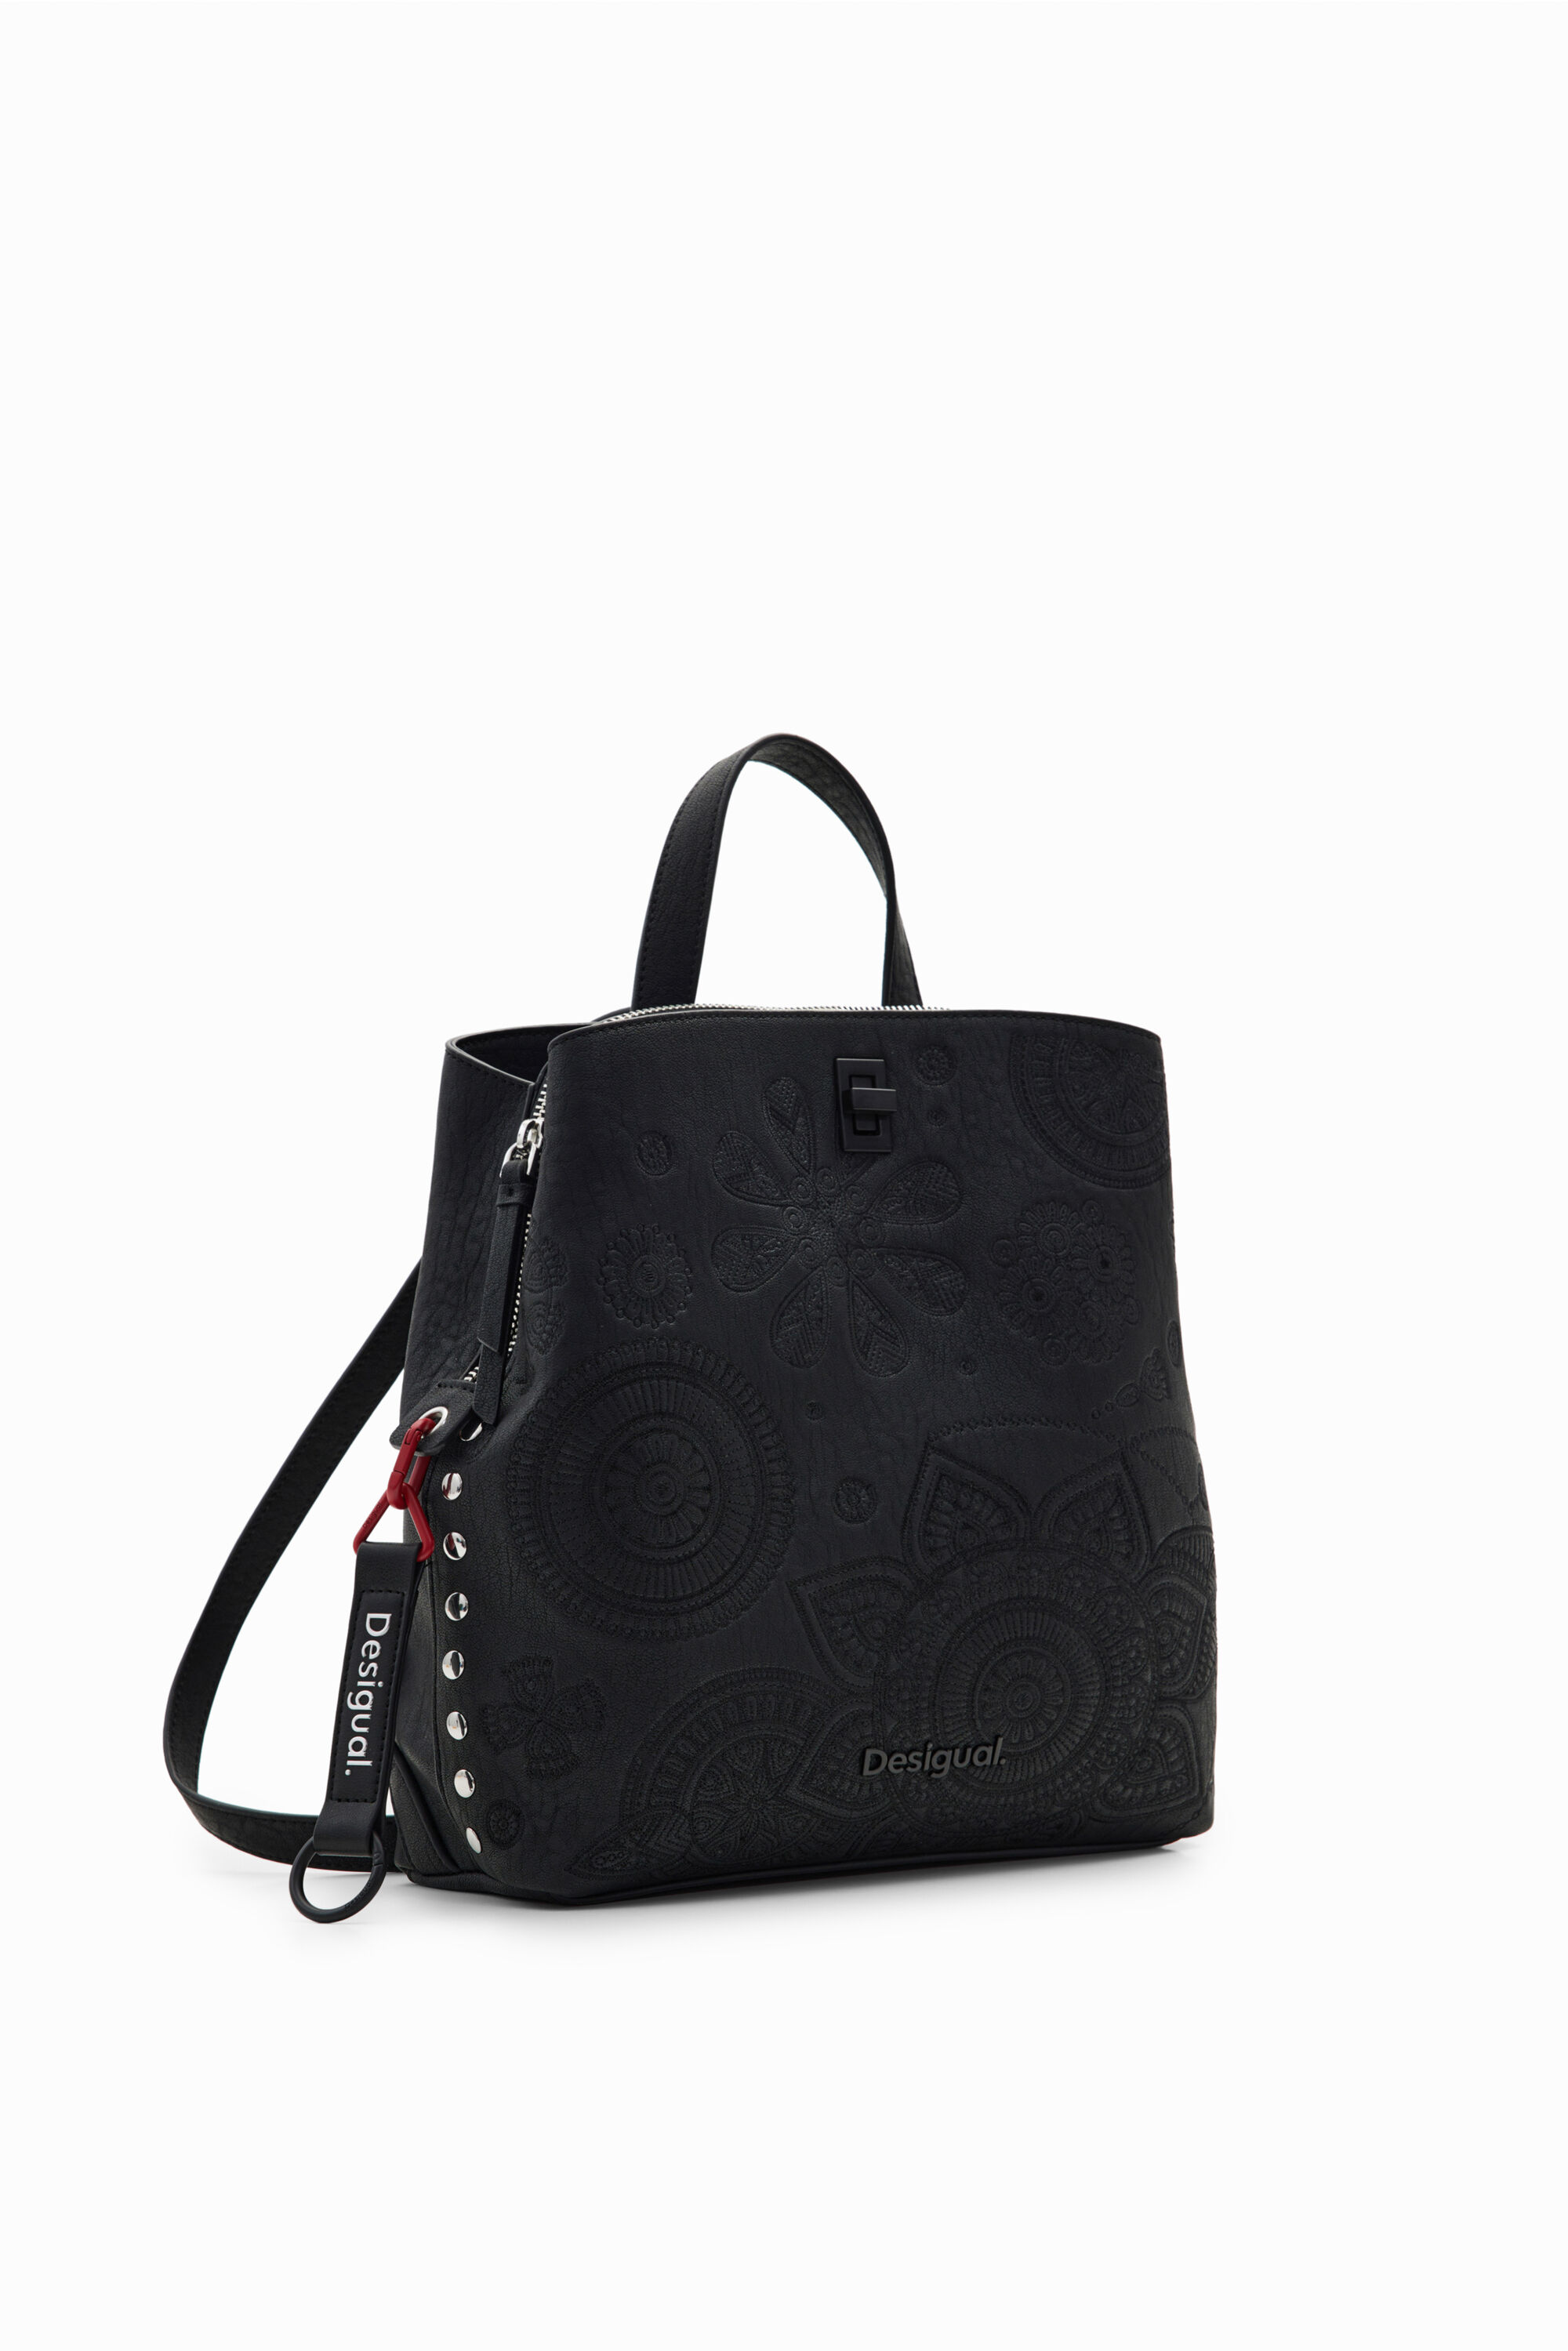 Desigual S embroidered backpack